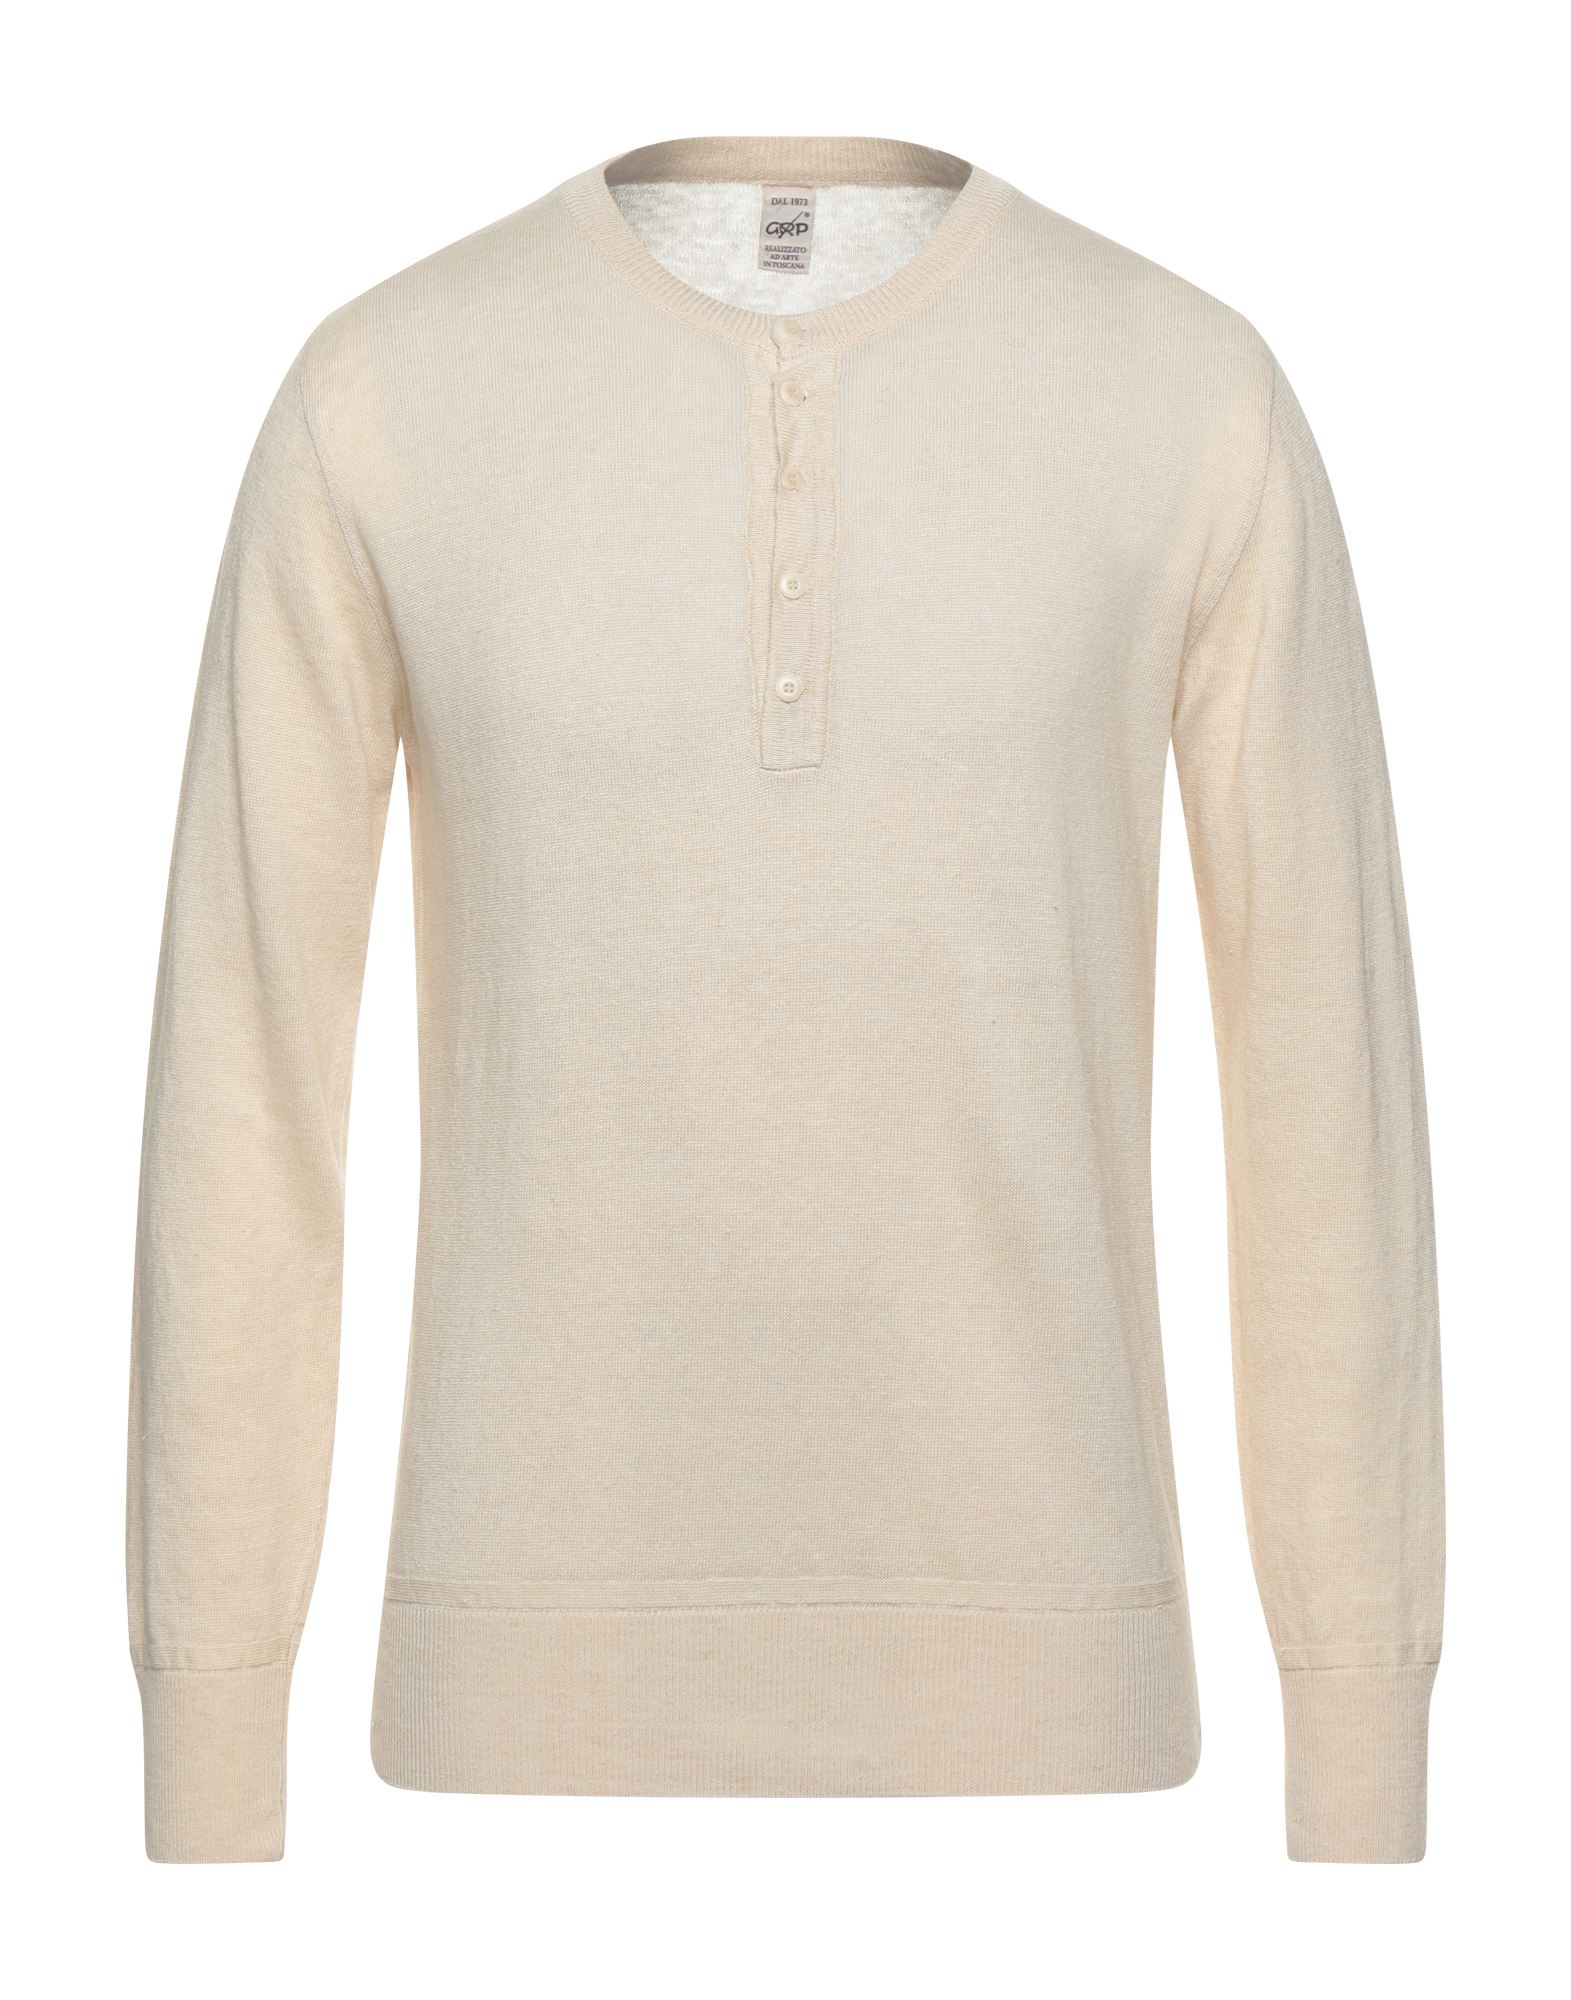 Grp Sweaters In Ivory